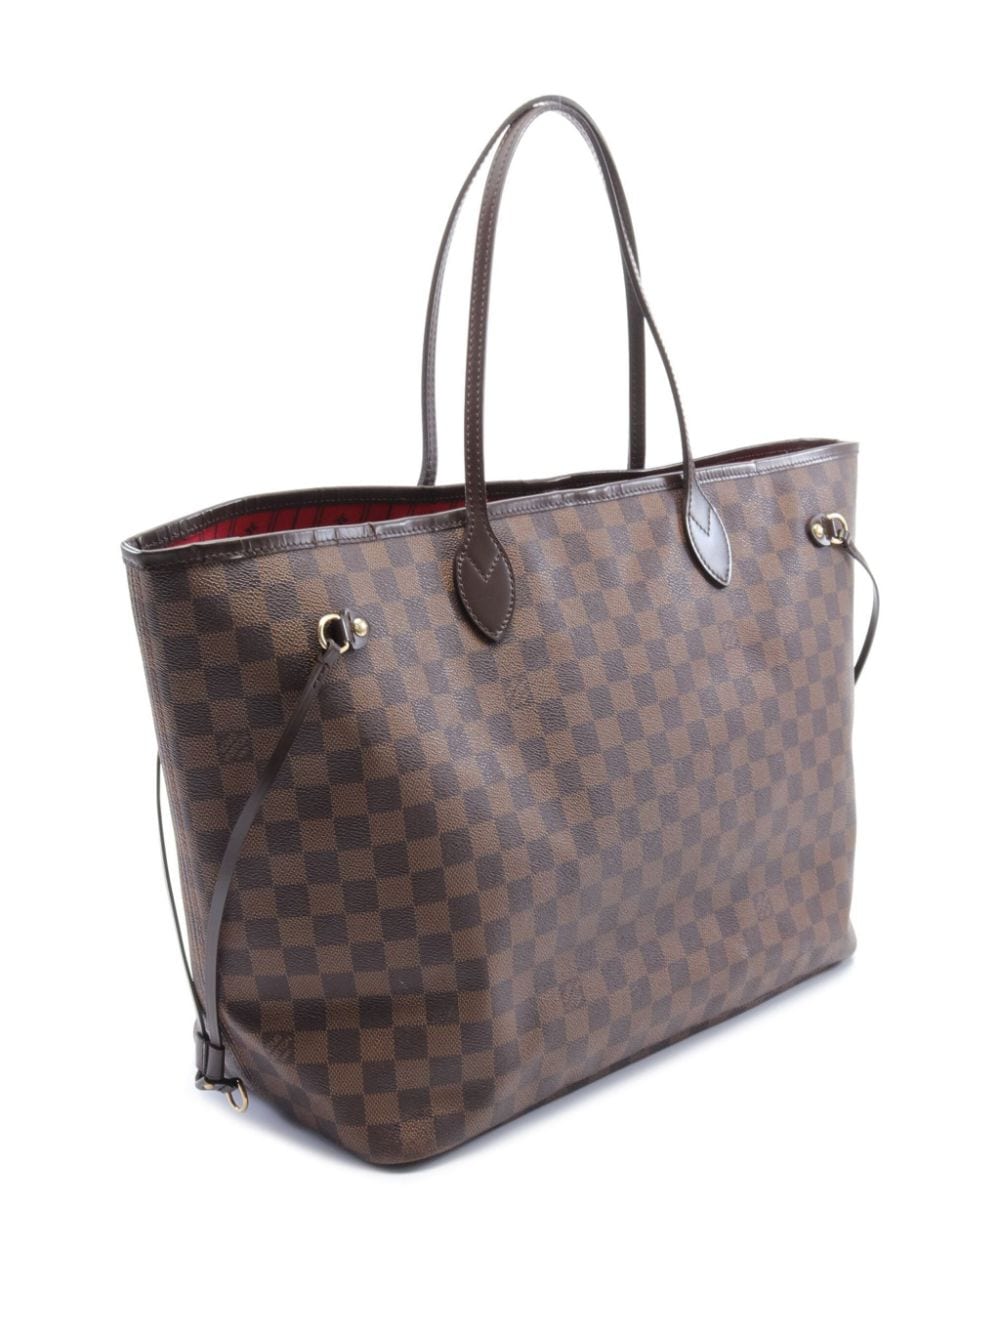 Louis Vuitton Pre-Owned 2010 Neverfull GM tote bag - Bruin